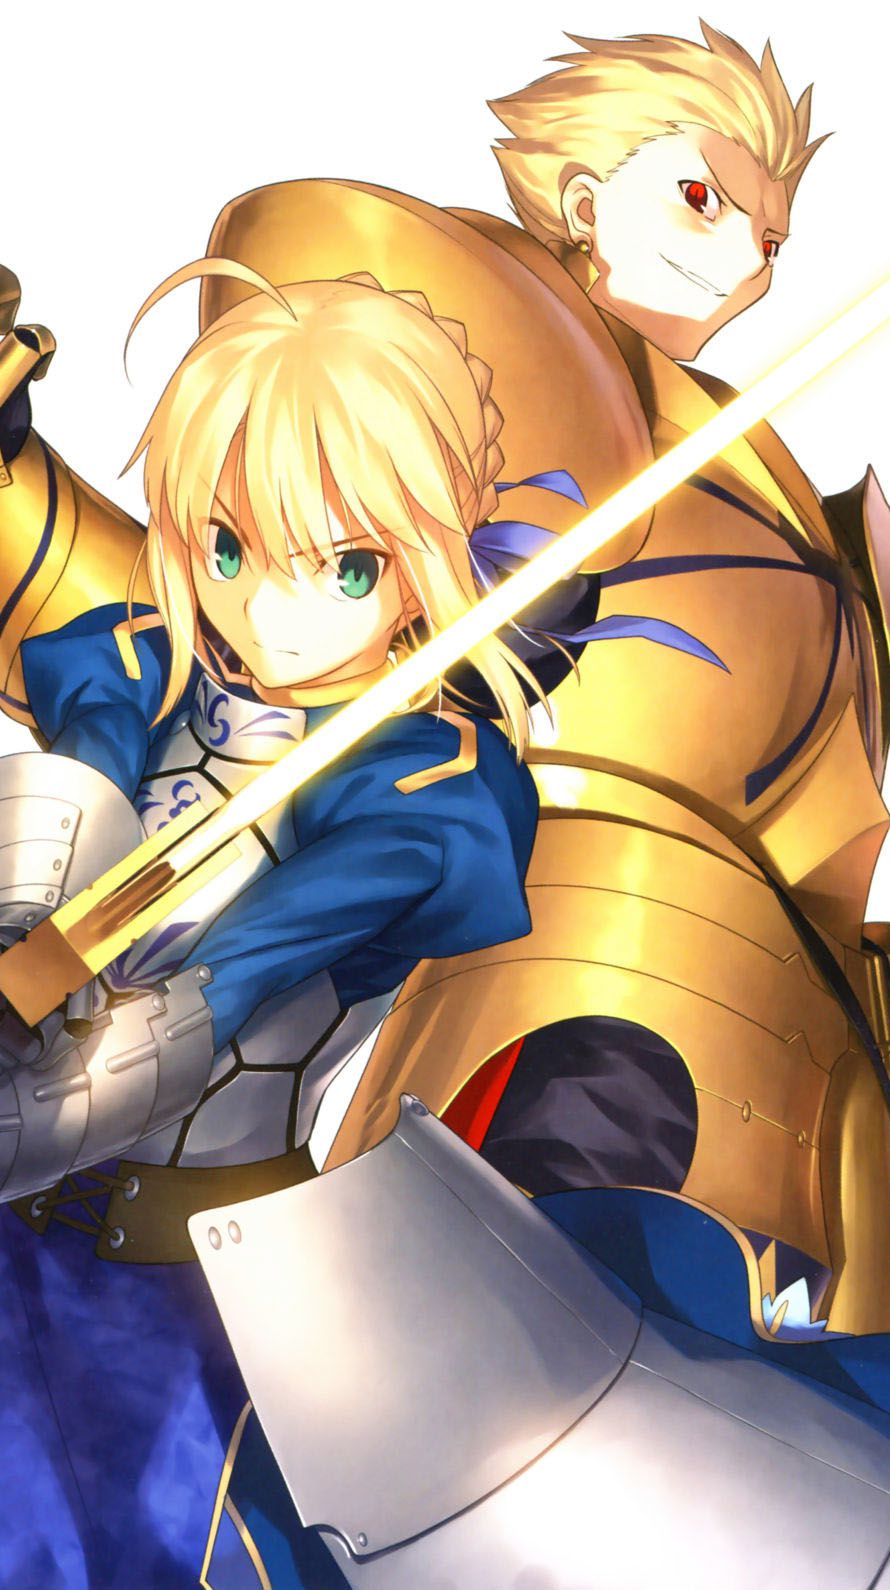 Fate Iphone壁紙画像 Androidスマホ壁紙 4 Iphone6 Iphone5s アニメ壁紙ネット Pc Android Iphone壁紙 画像